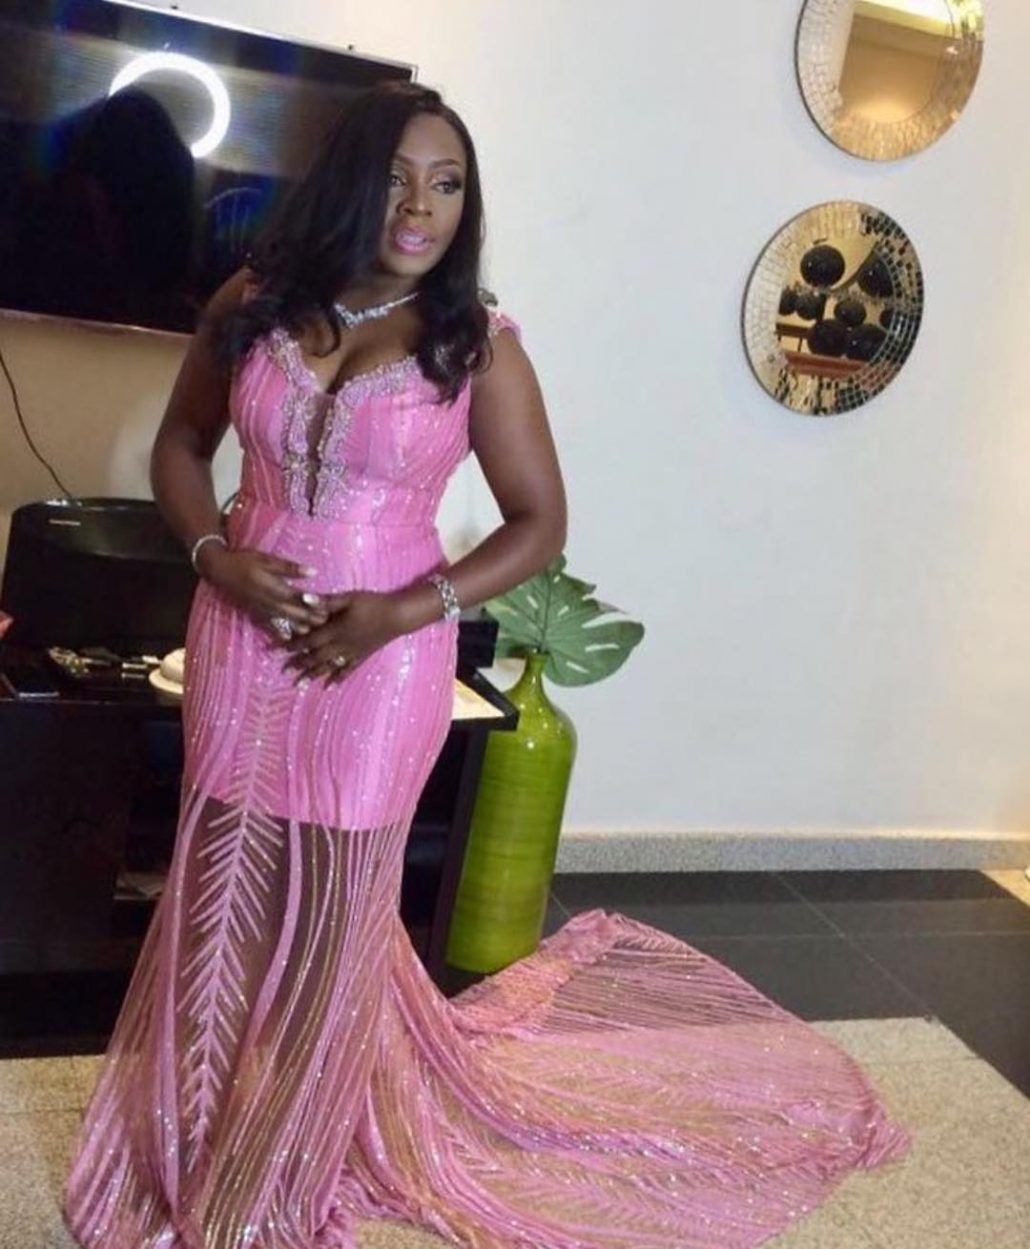 Check Out These Hot Sauce Aso Ebi Styles From The Weekend.